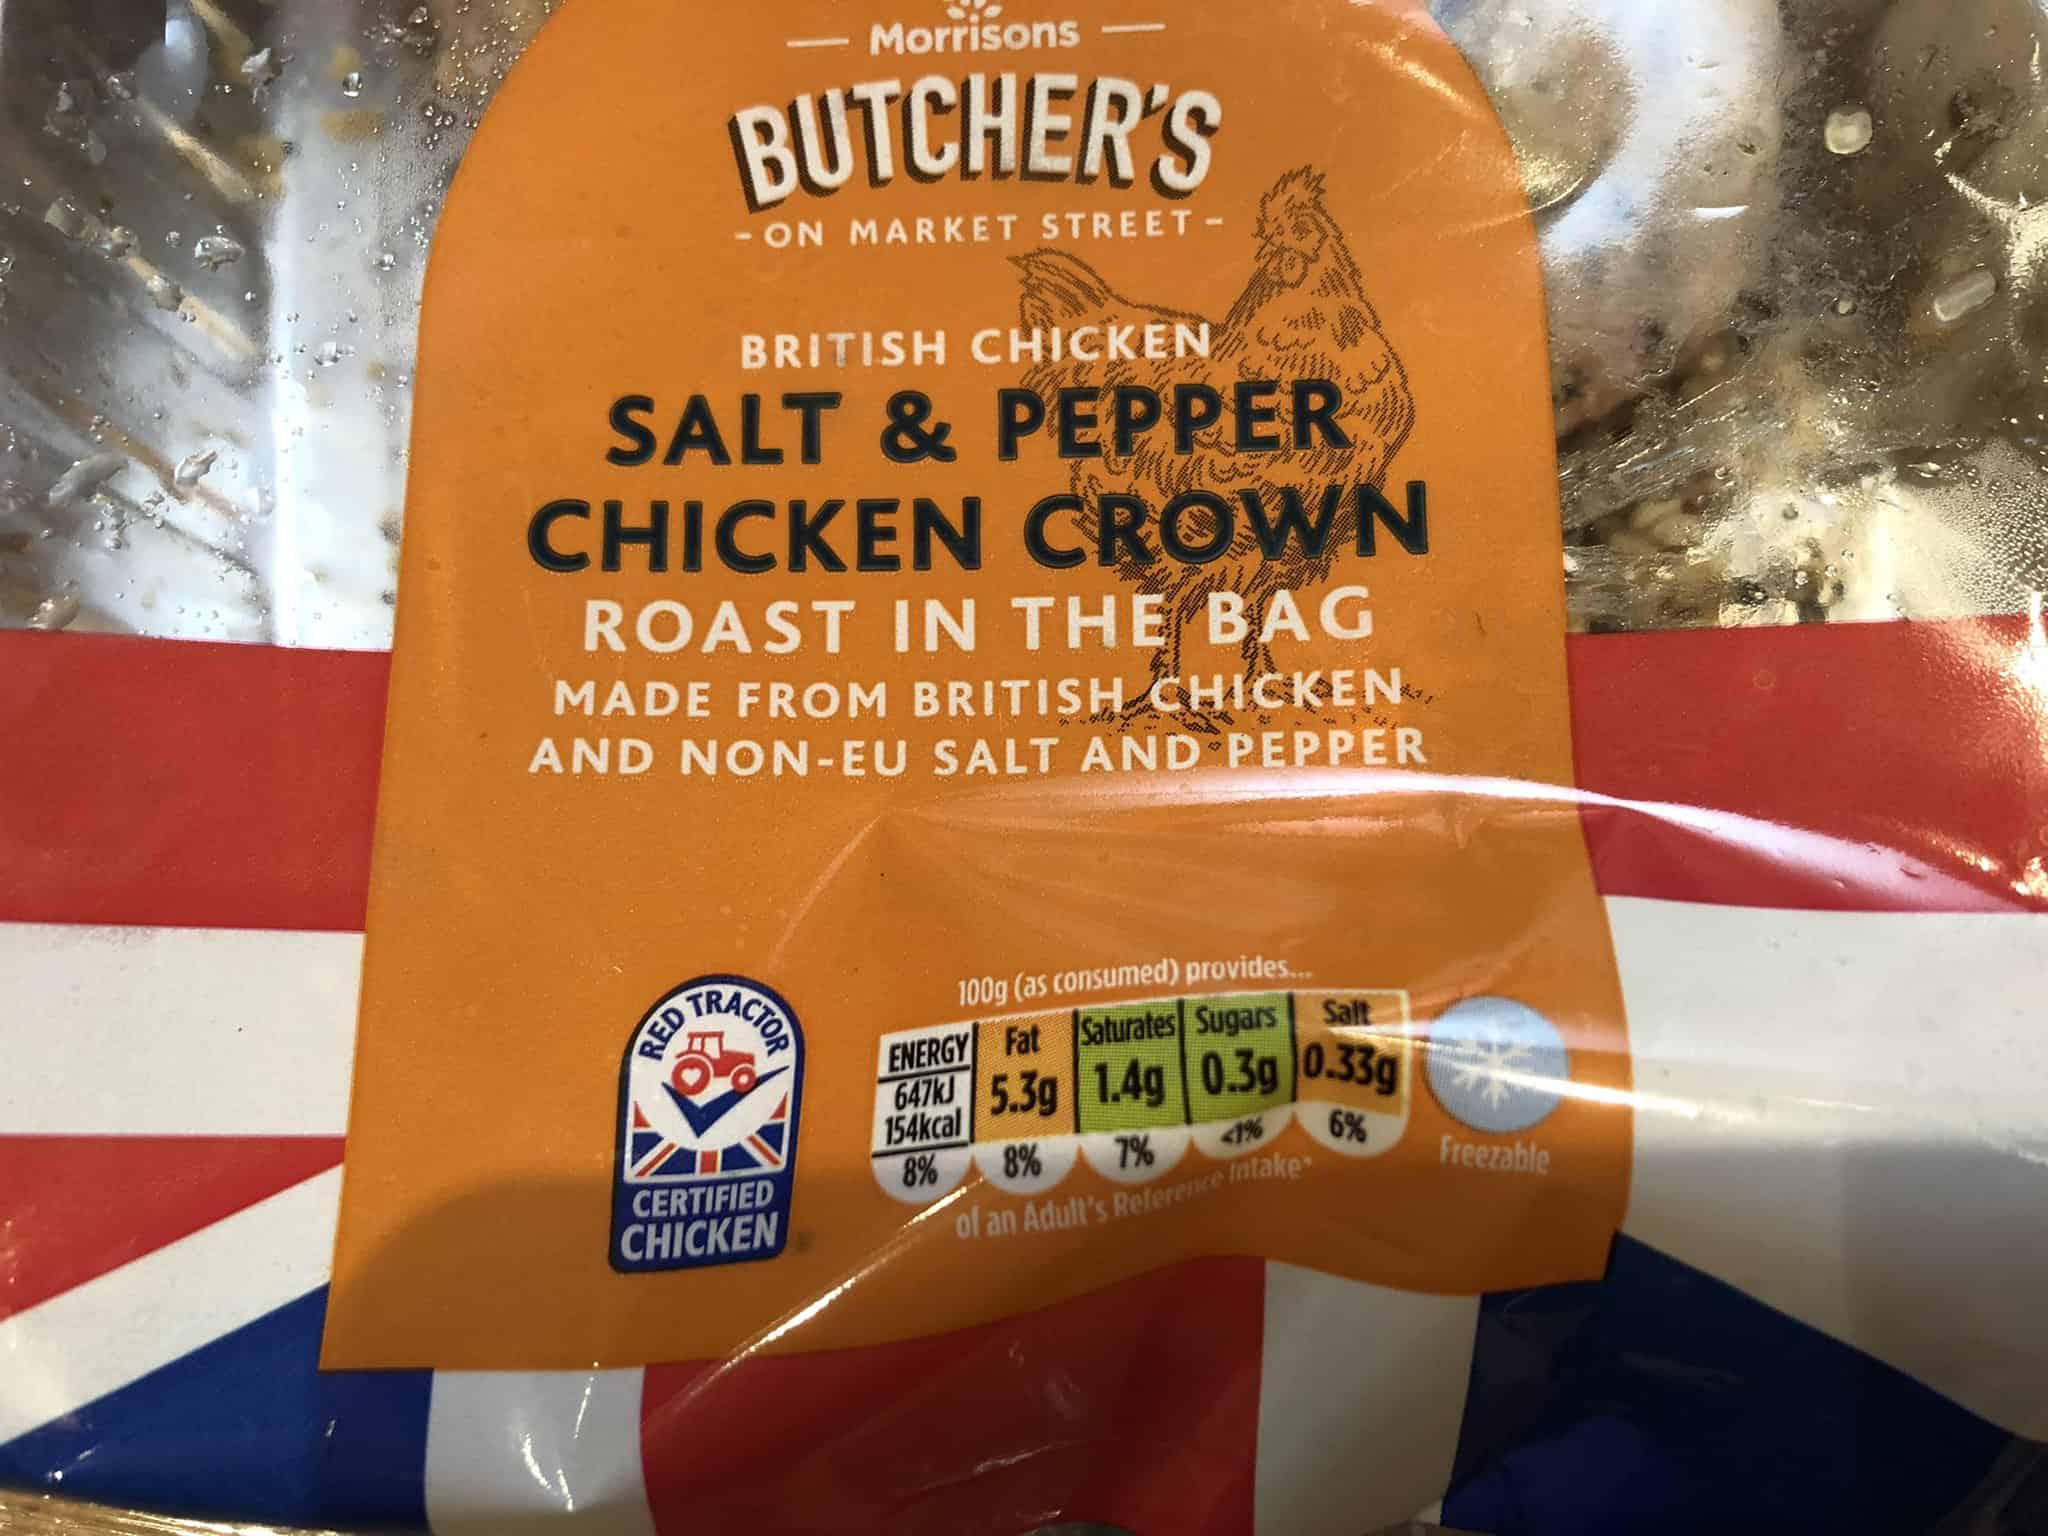 Morrisons backtracks after advertising ‘non-EU salt and pepper’ on its ‘British’ chicken